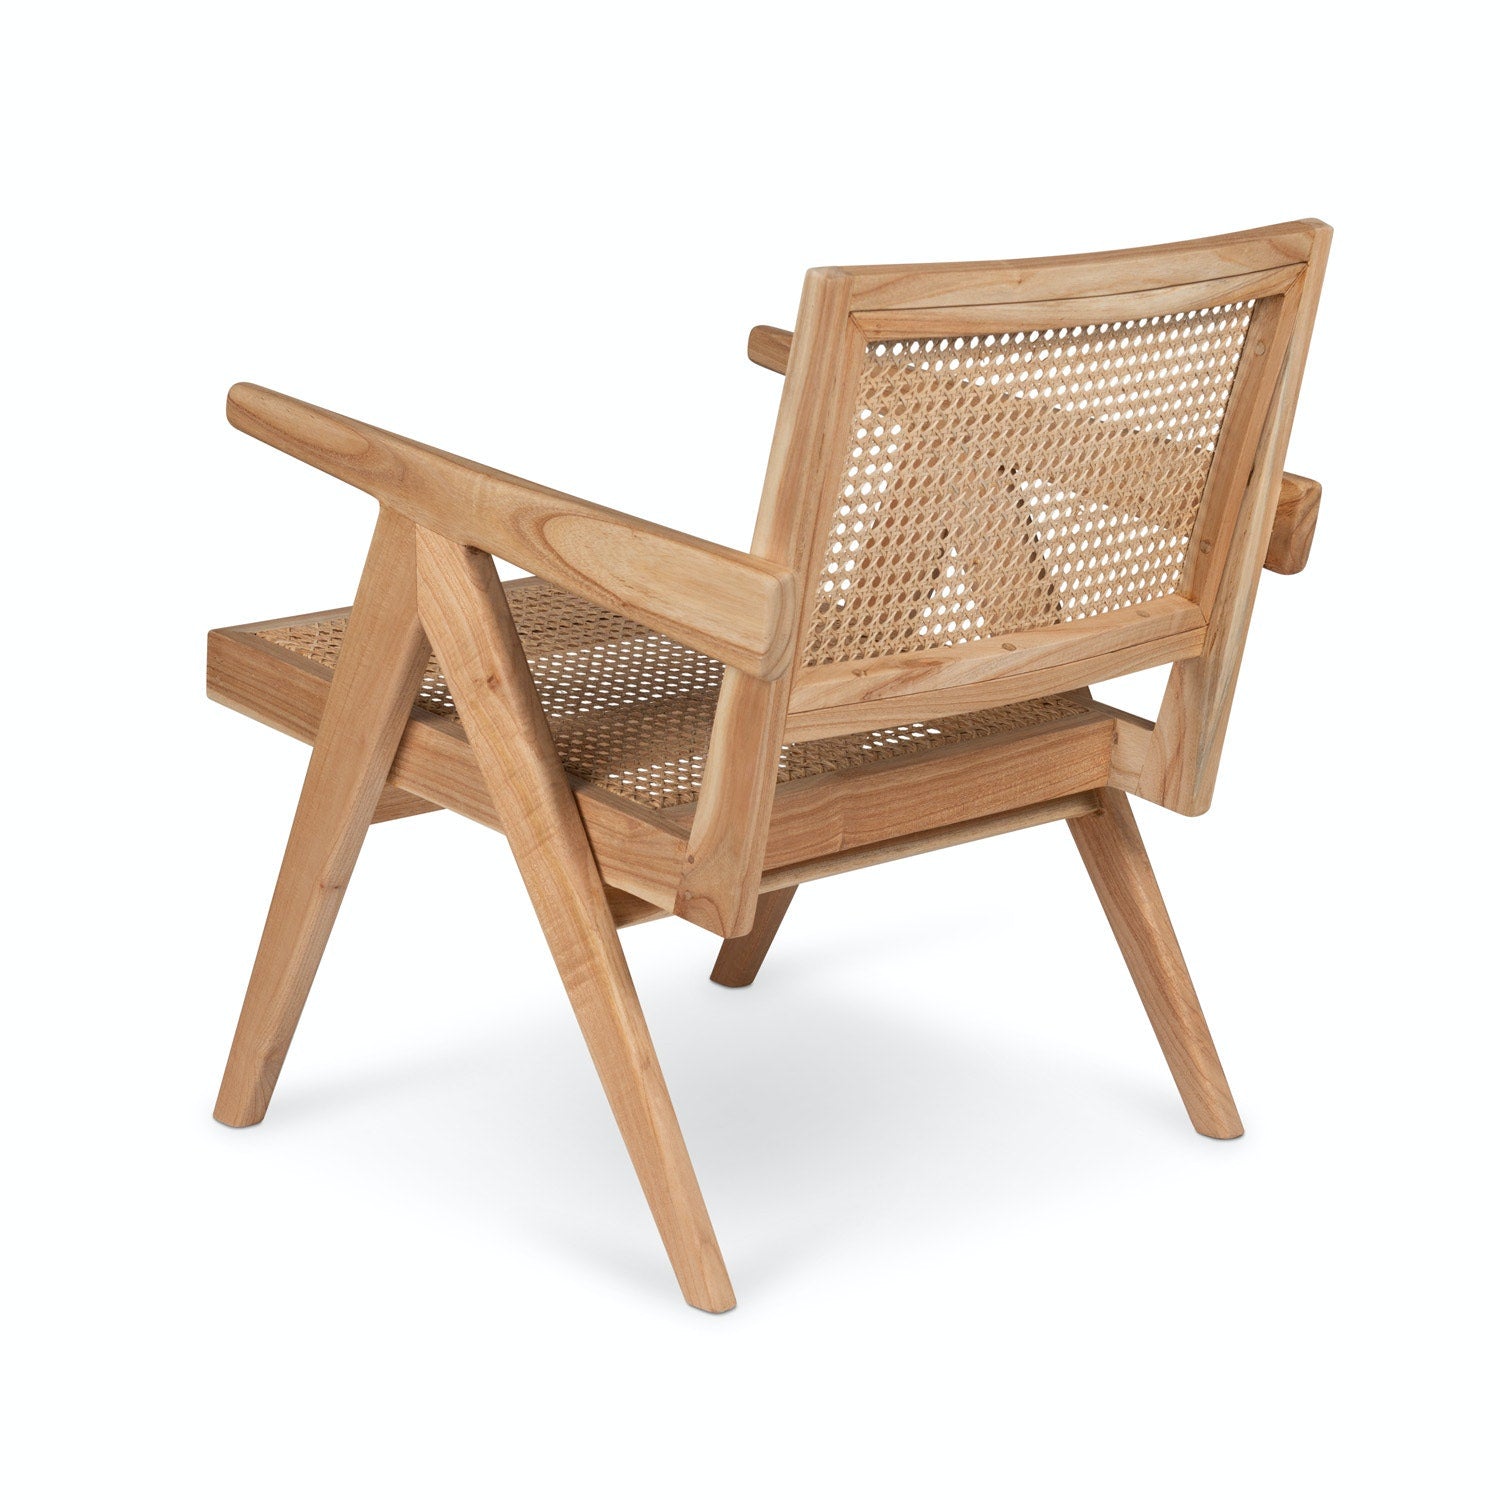 Easy armchair - natural